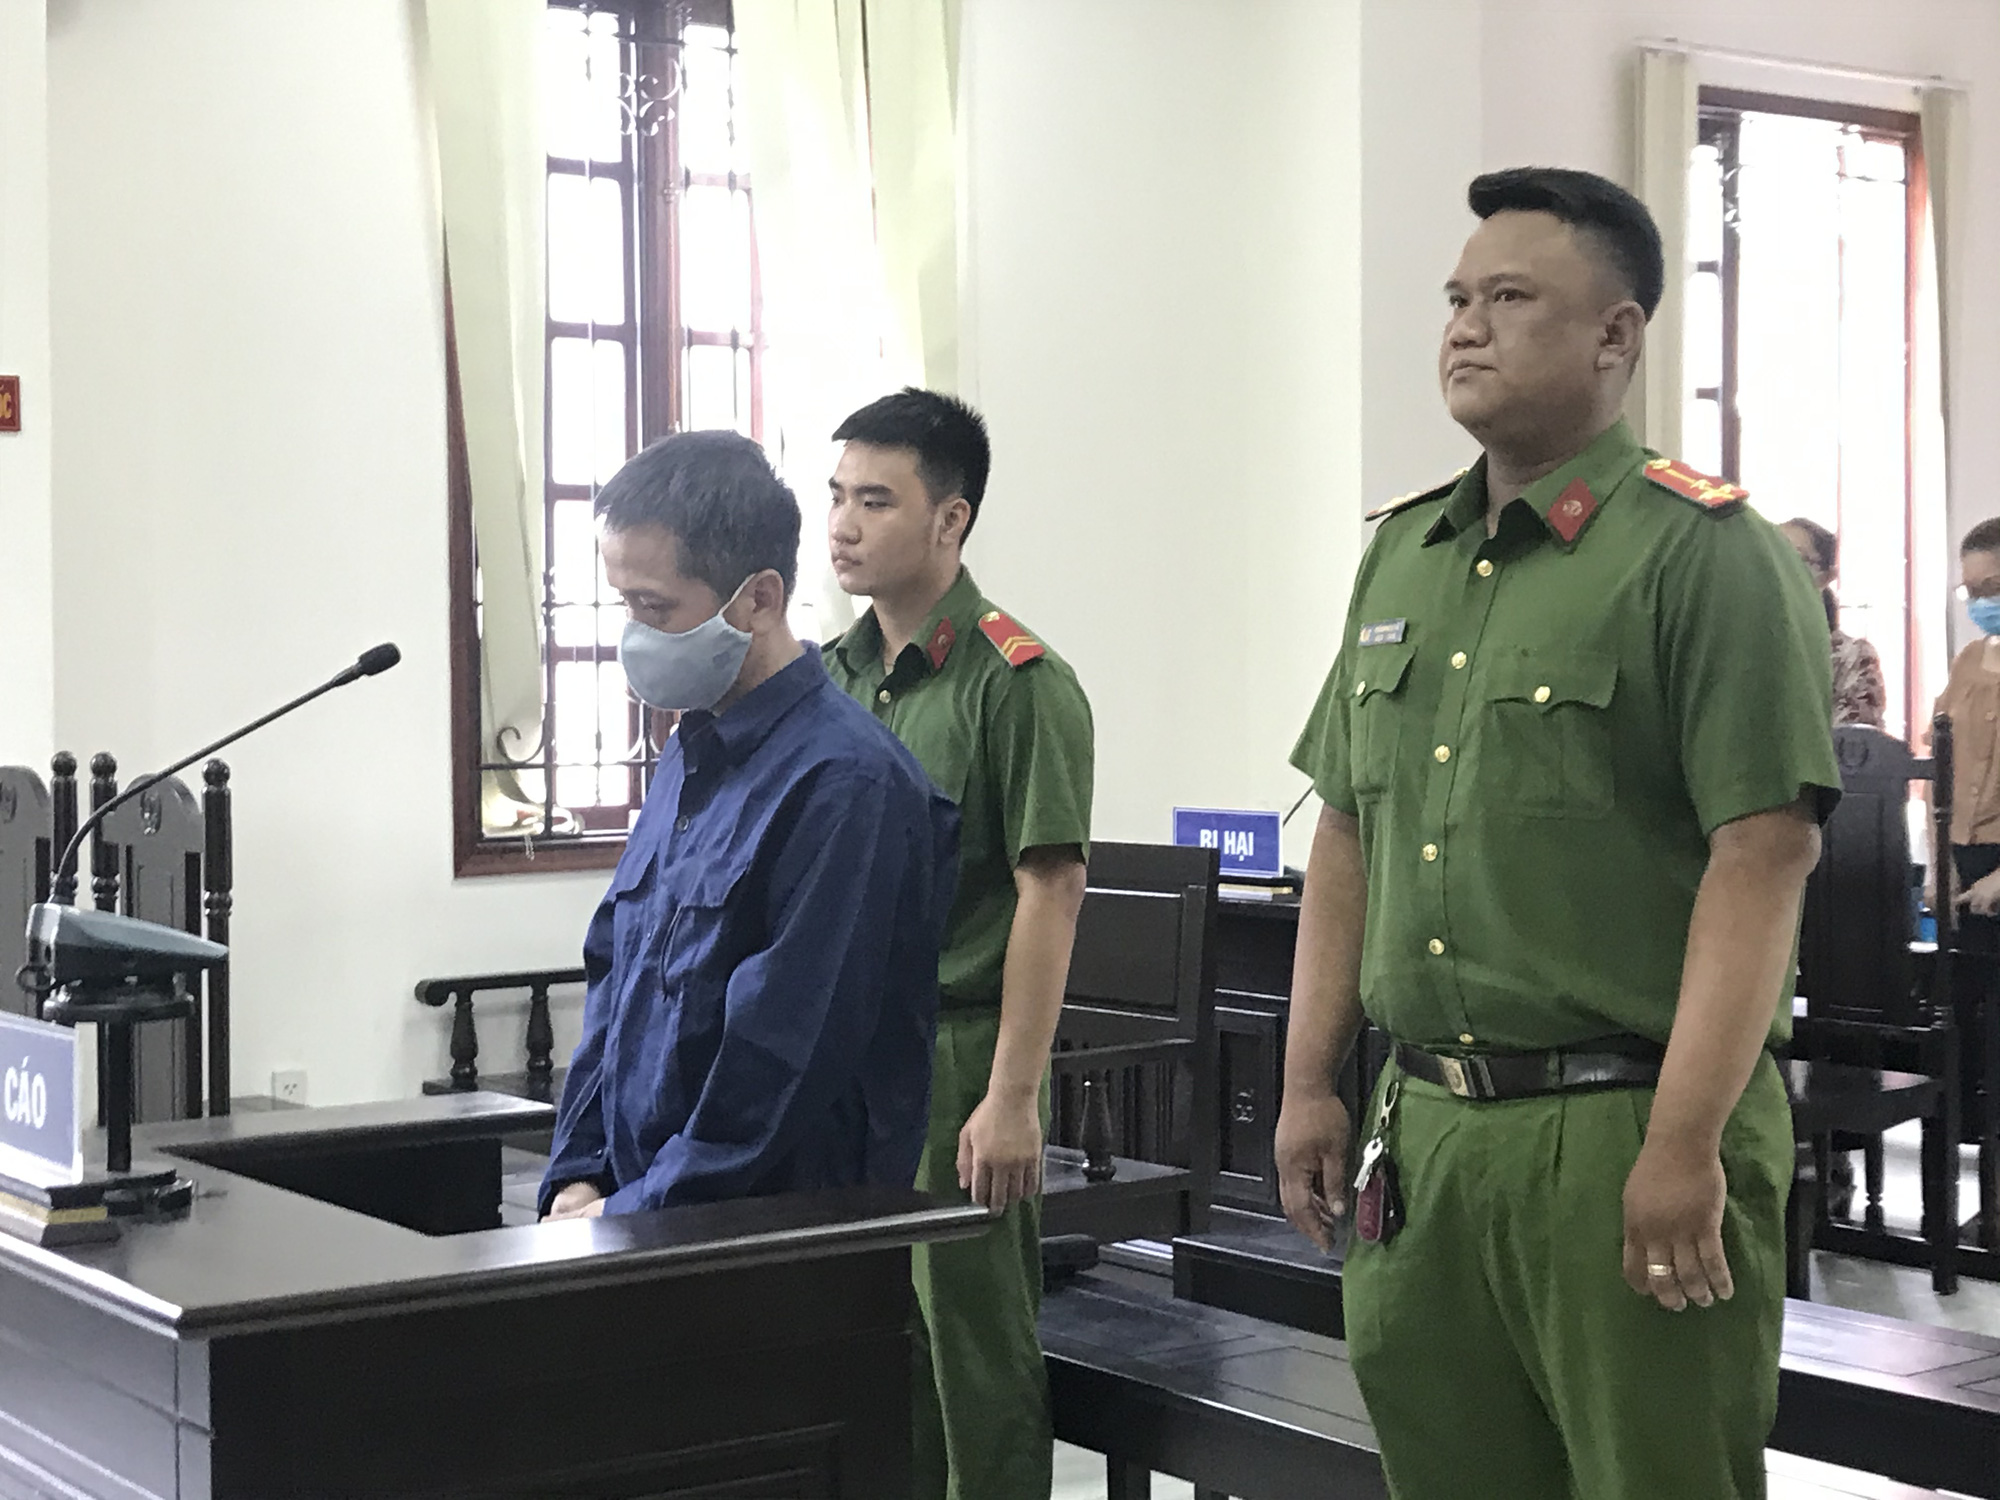 Ho Chi Minh City social worker jailed for 4.5 years for molesting teenage girls